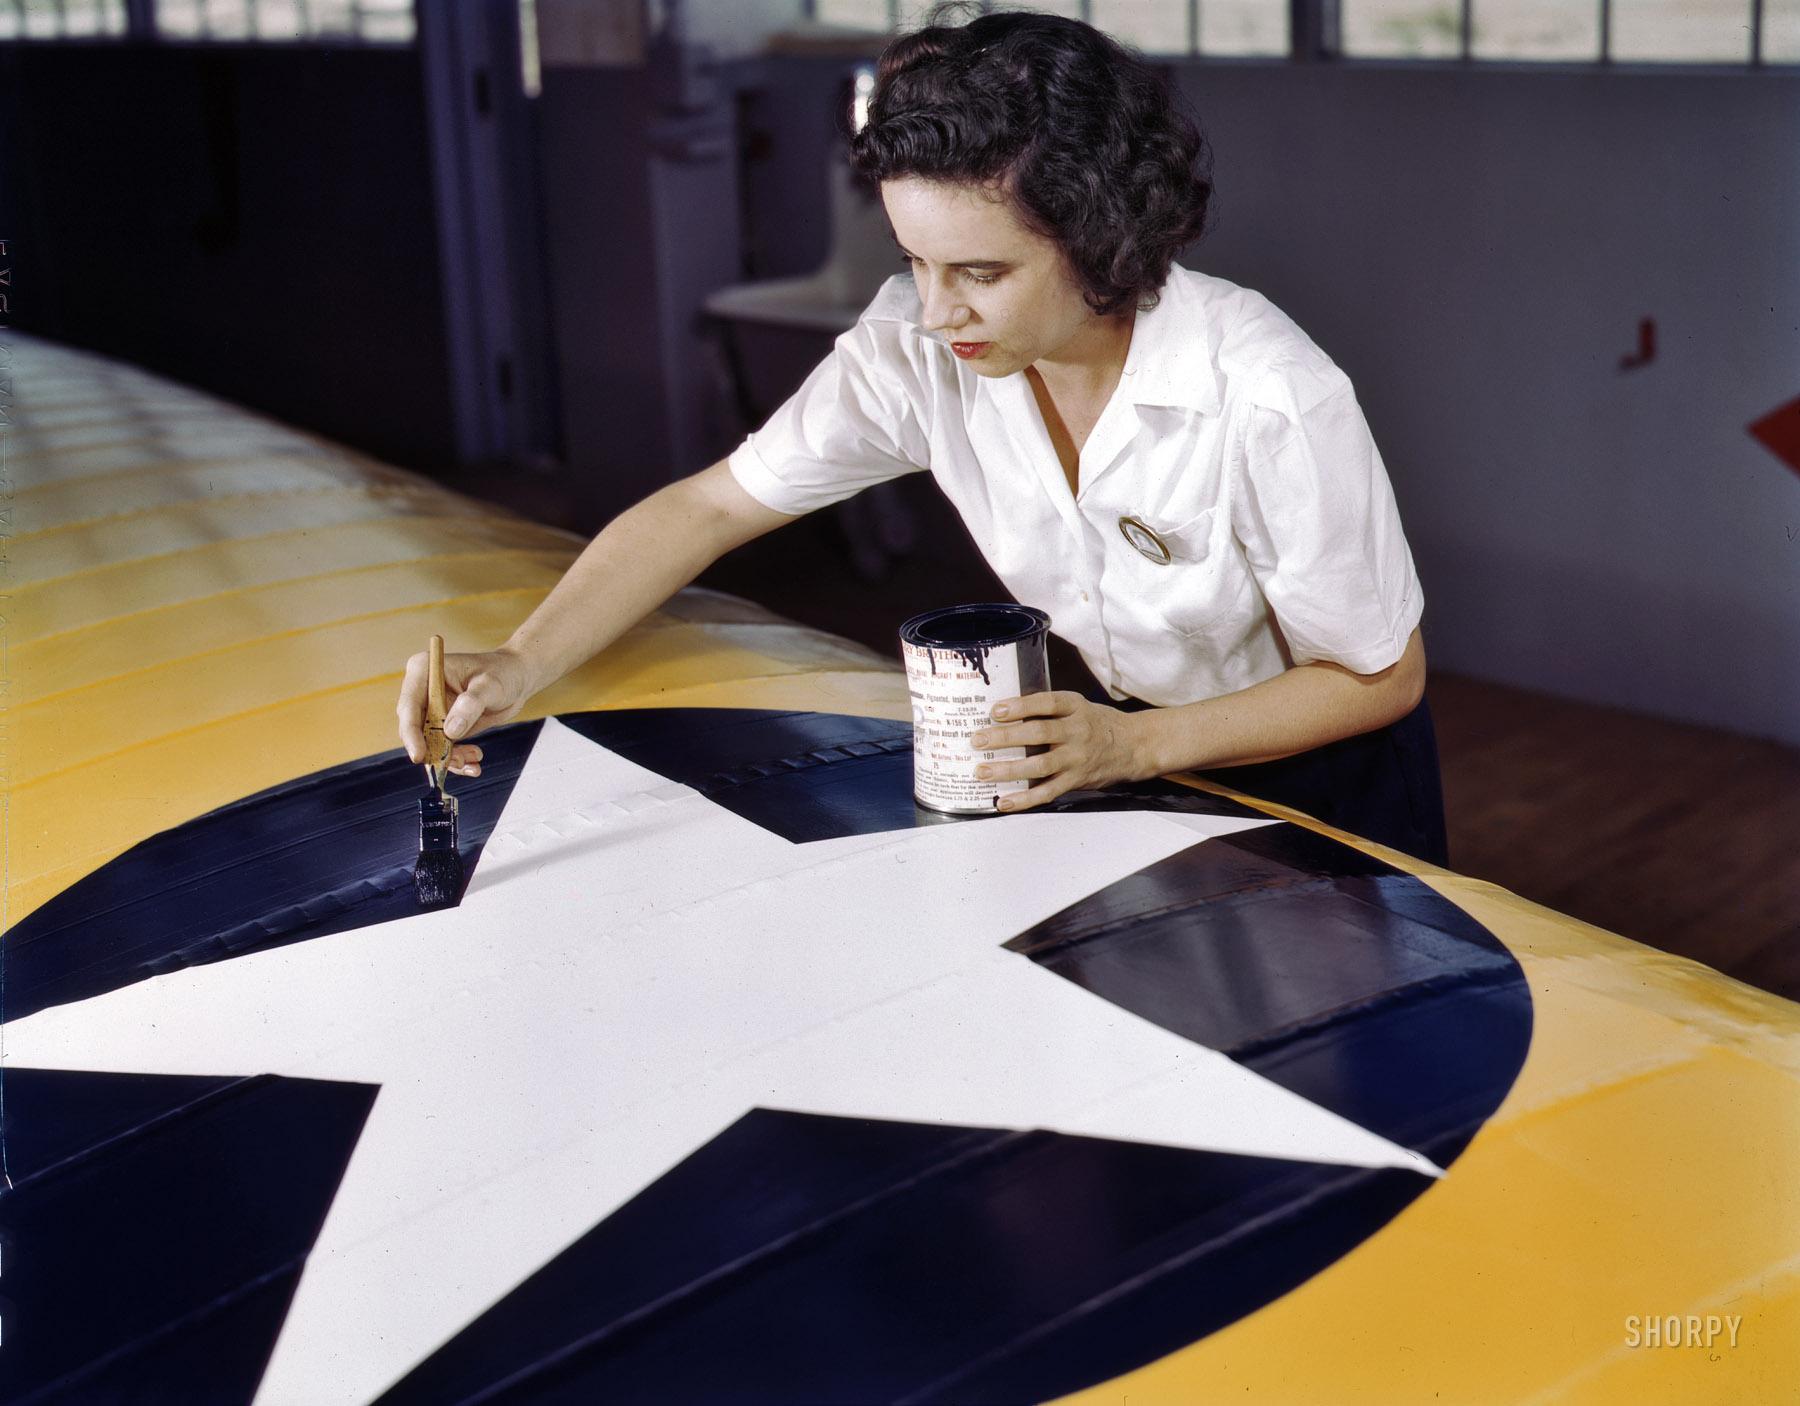 August 1942. Corpus Christi, Texas. "Women from all fields have joined the production army. Miss Grace Weaver, a civil service worker at the Naval Air Base and a schoolteacher before the war, is doing her part for victory along with her brother, who is a flying instructor in the Army. Miss Weaver paints the American insignia on repaired Navy plane wings." 4x5 Kodachrome transparency by Howard Hollem for the Office of War Information. View full size.